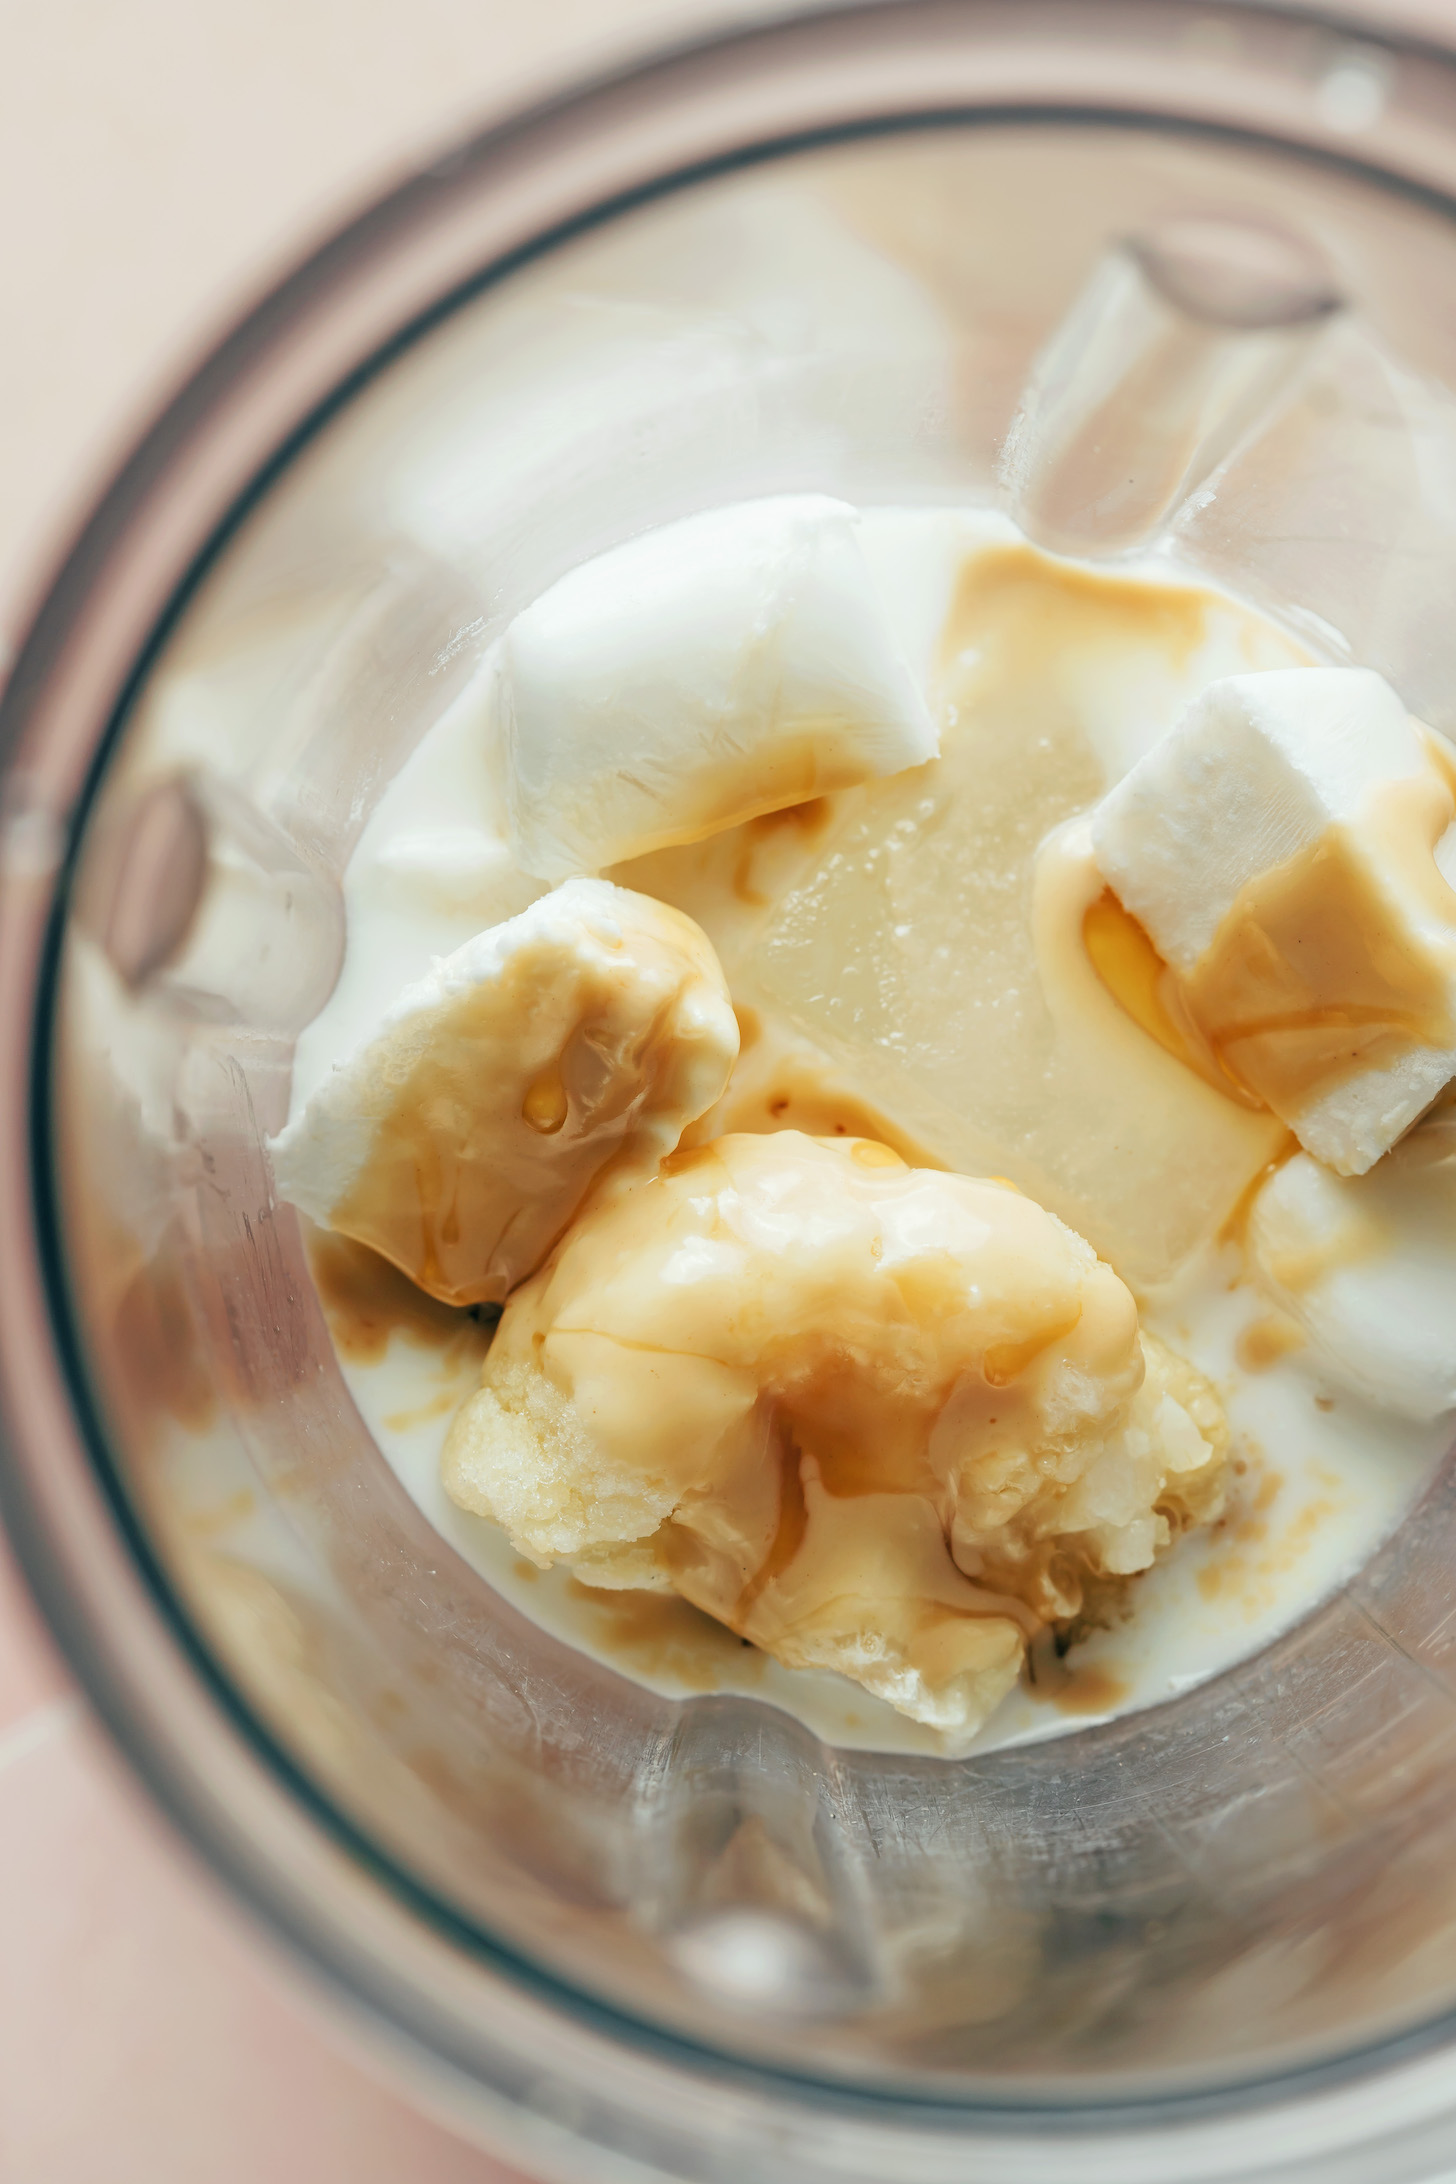 Blender with dairy-free milk, coconut milk ice cubes, frozen cauliflower, tahini, maple syrup, and vanilla